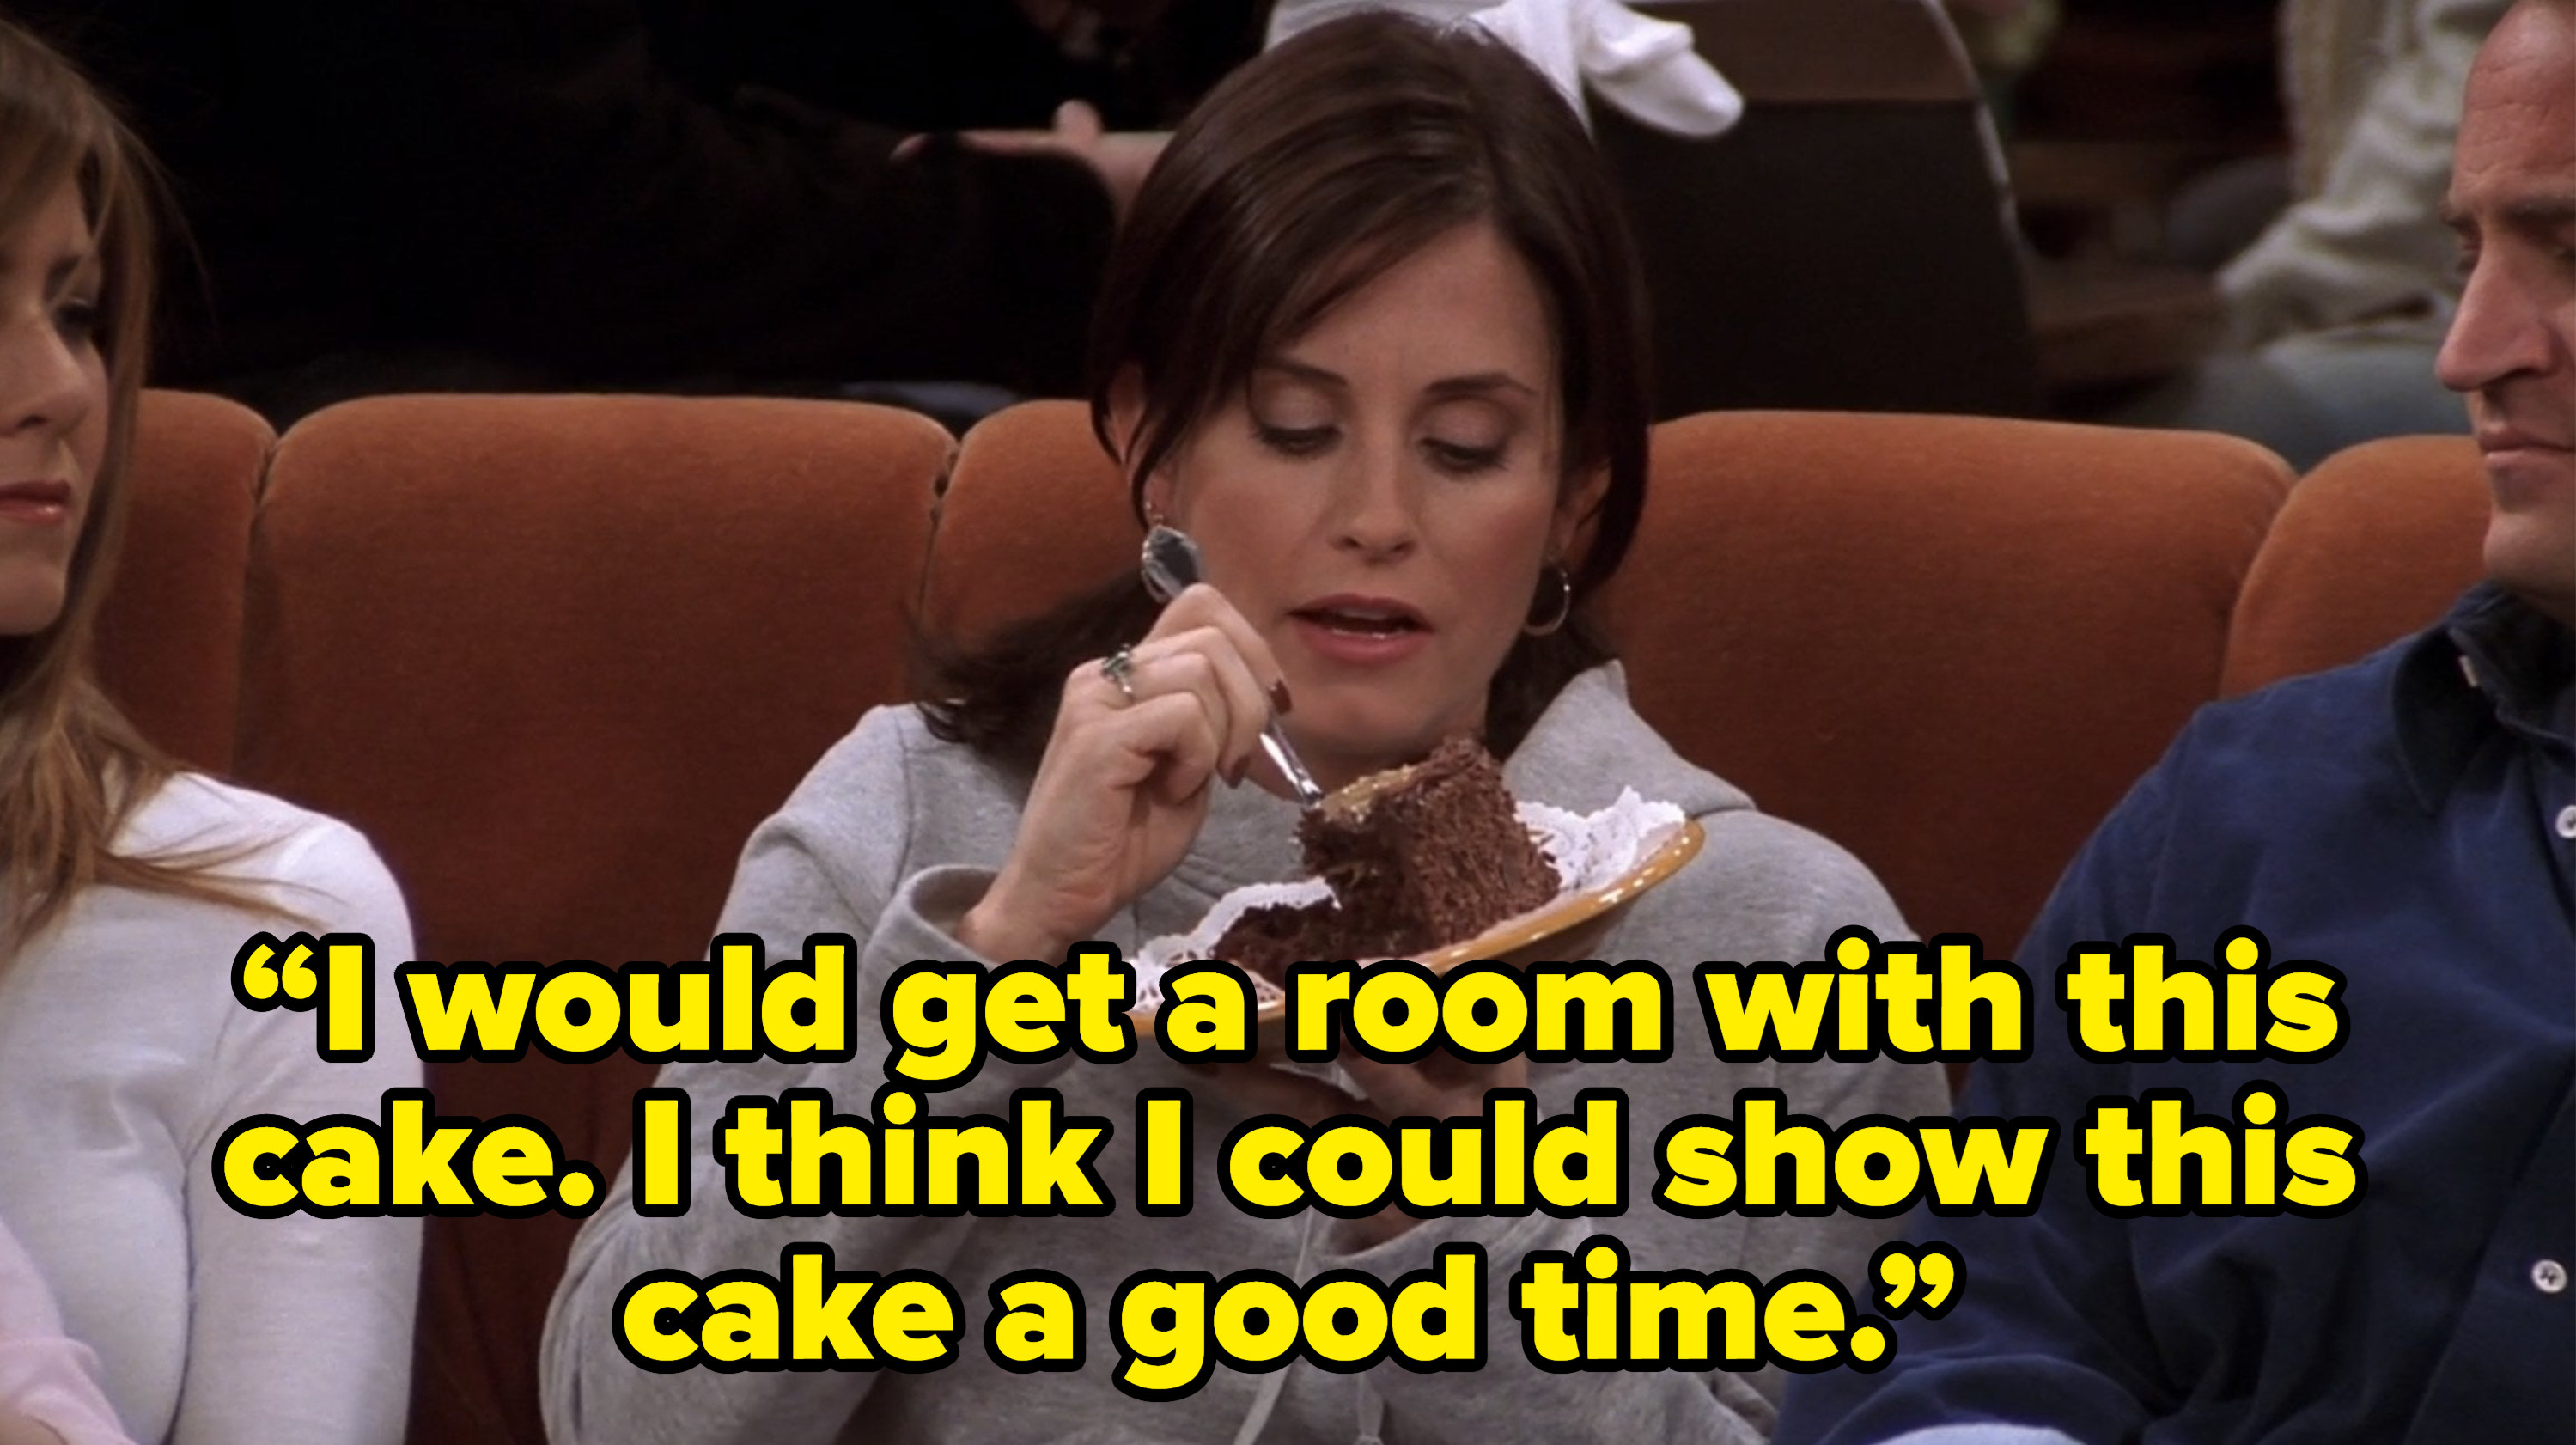 monica saying “I would get a room with this cake. I think I could show this cake a good time.” on friends